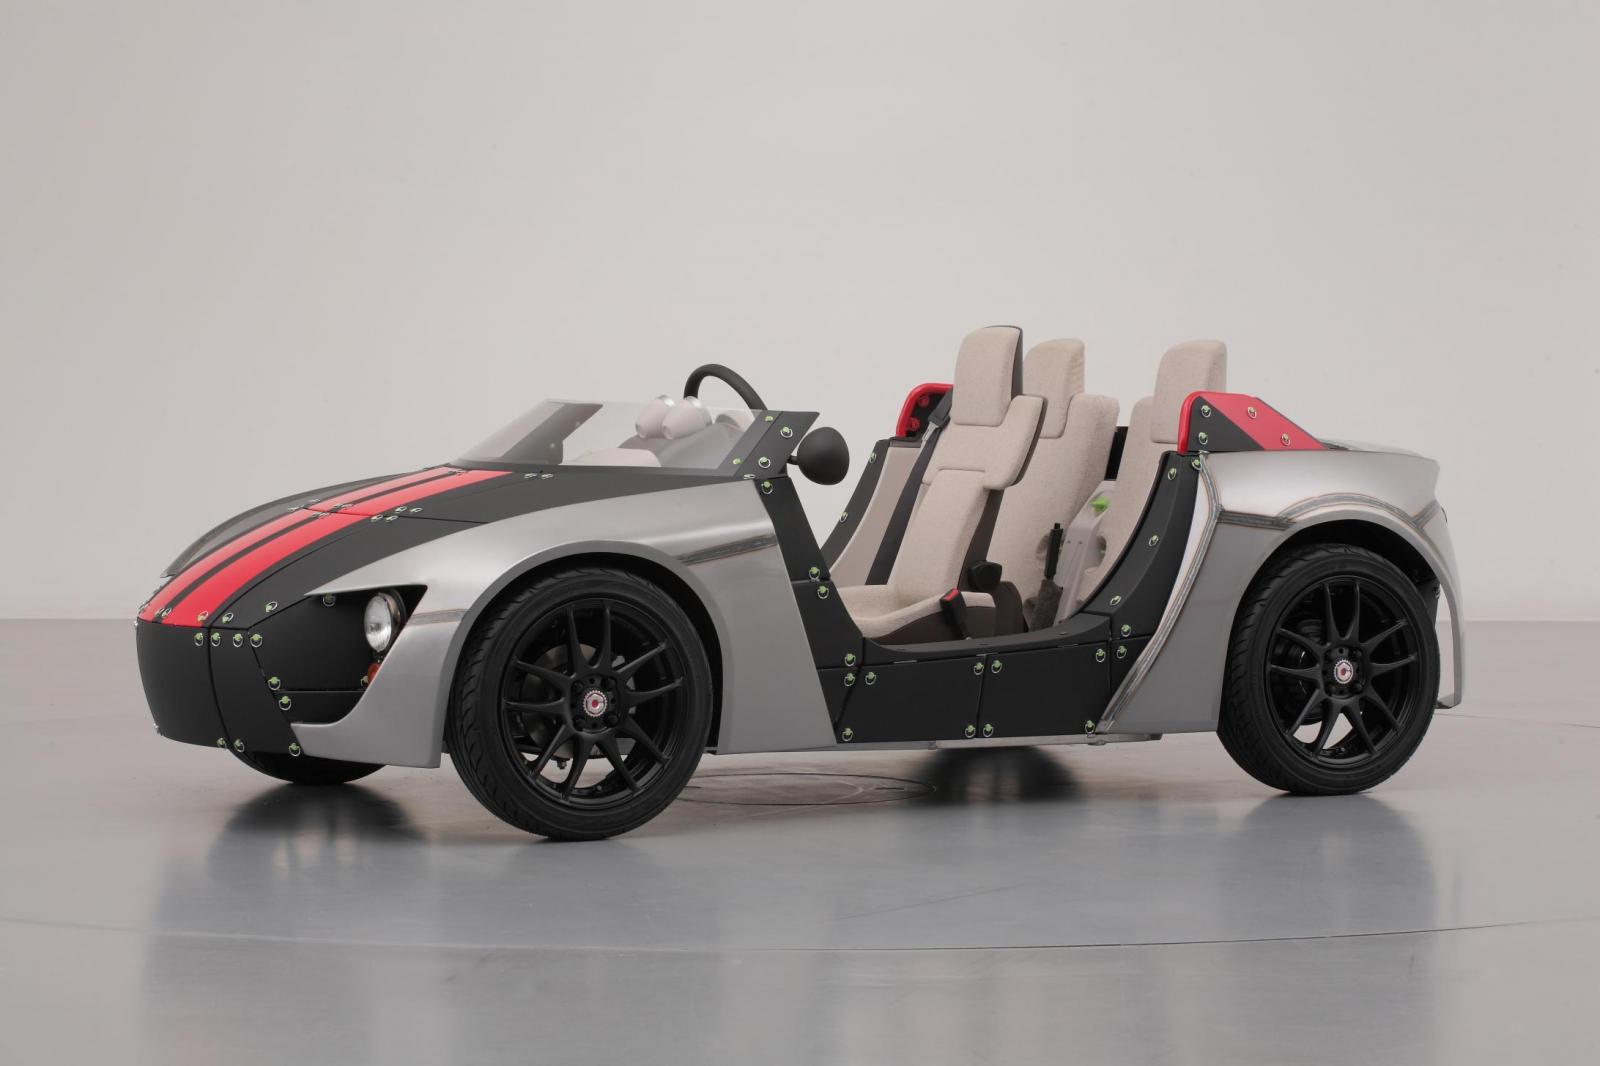 Toyota Camatte57s concept; a sports car for the whole family